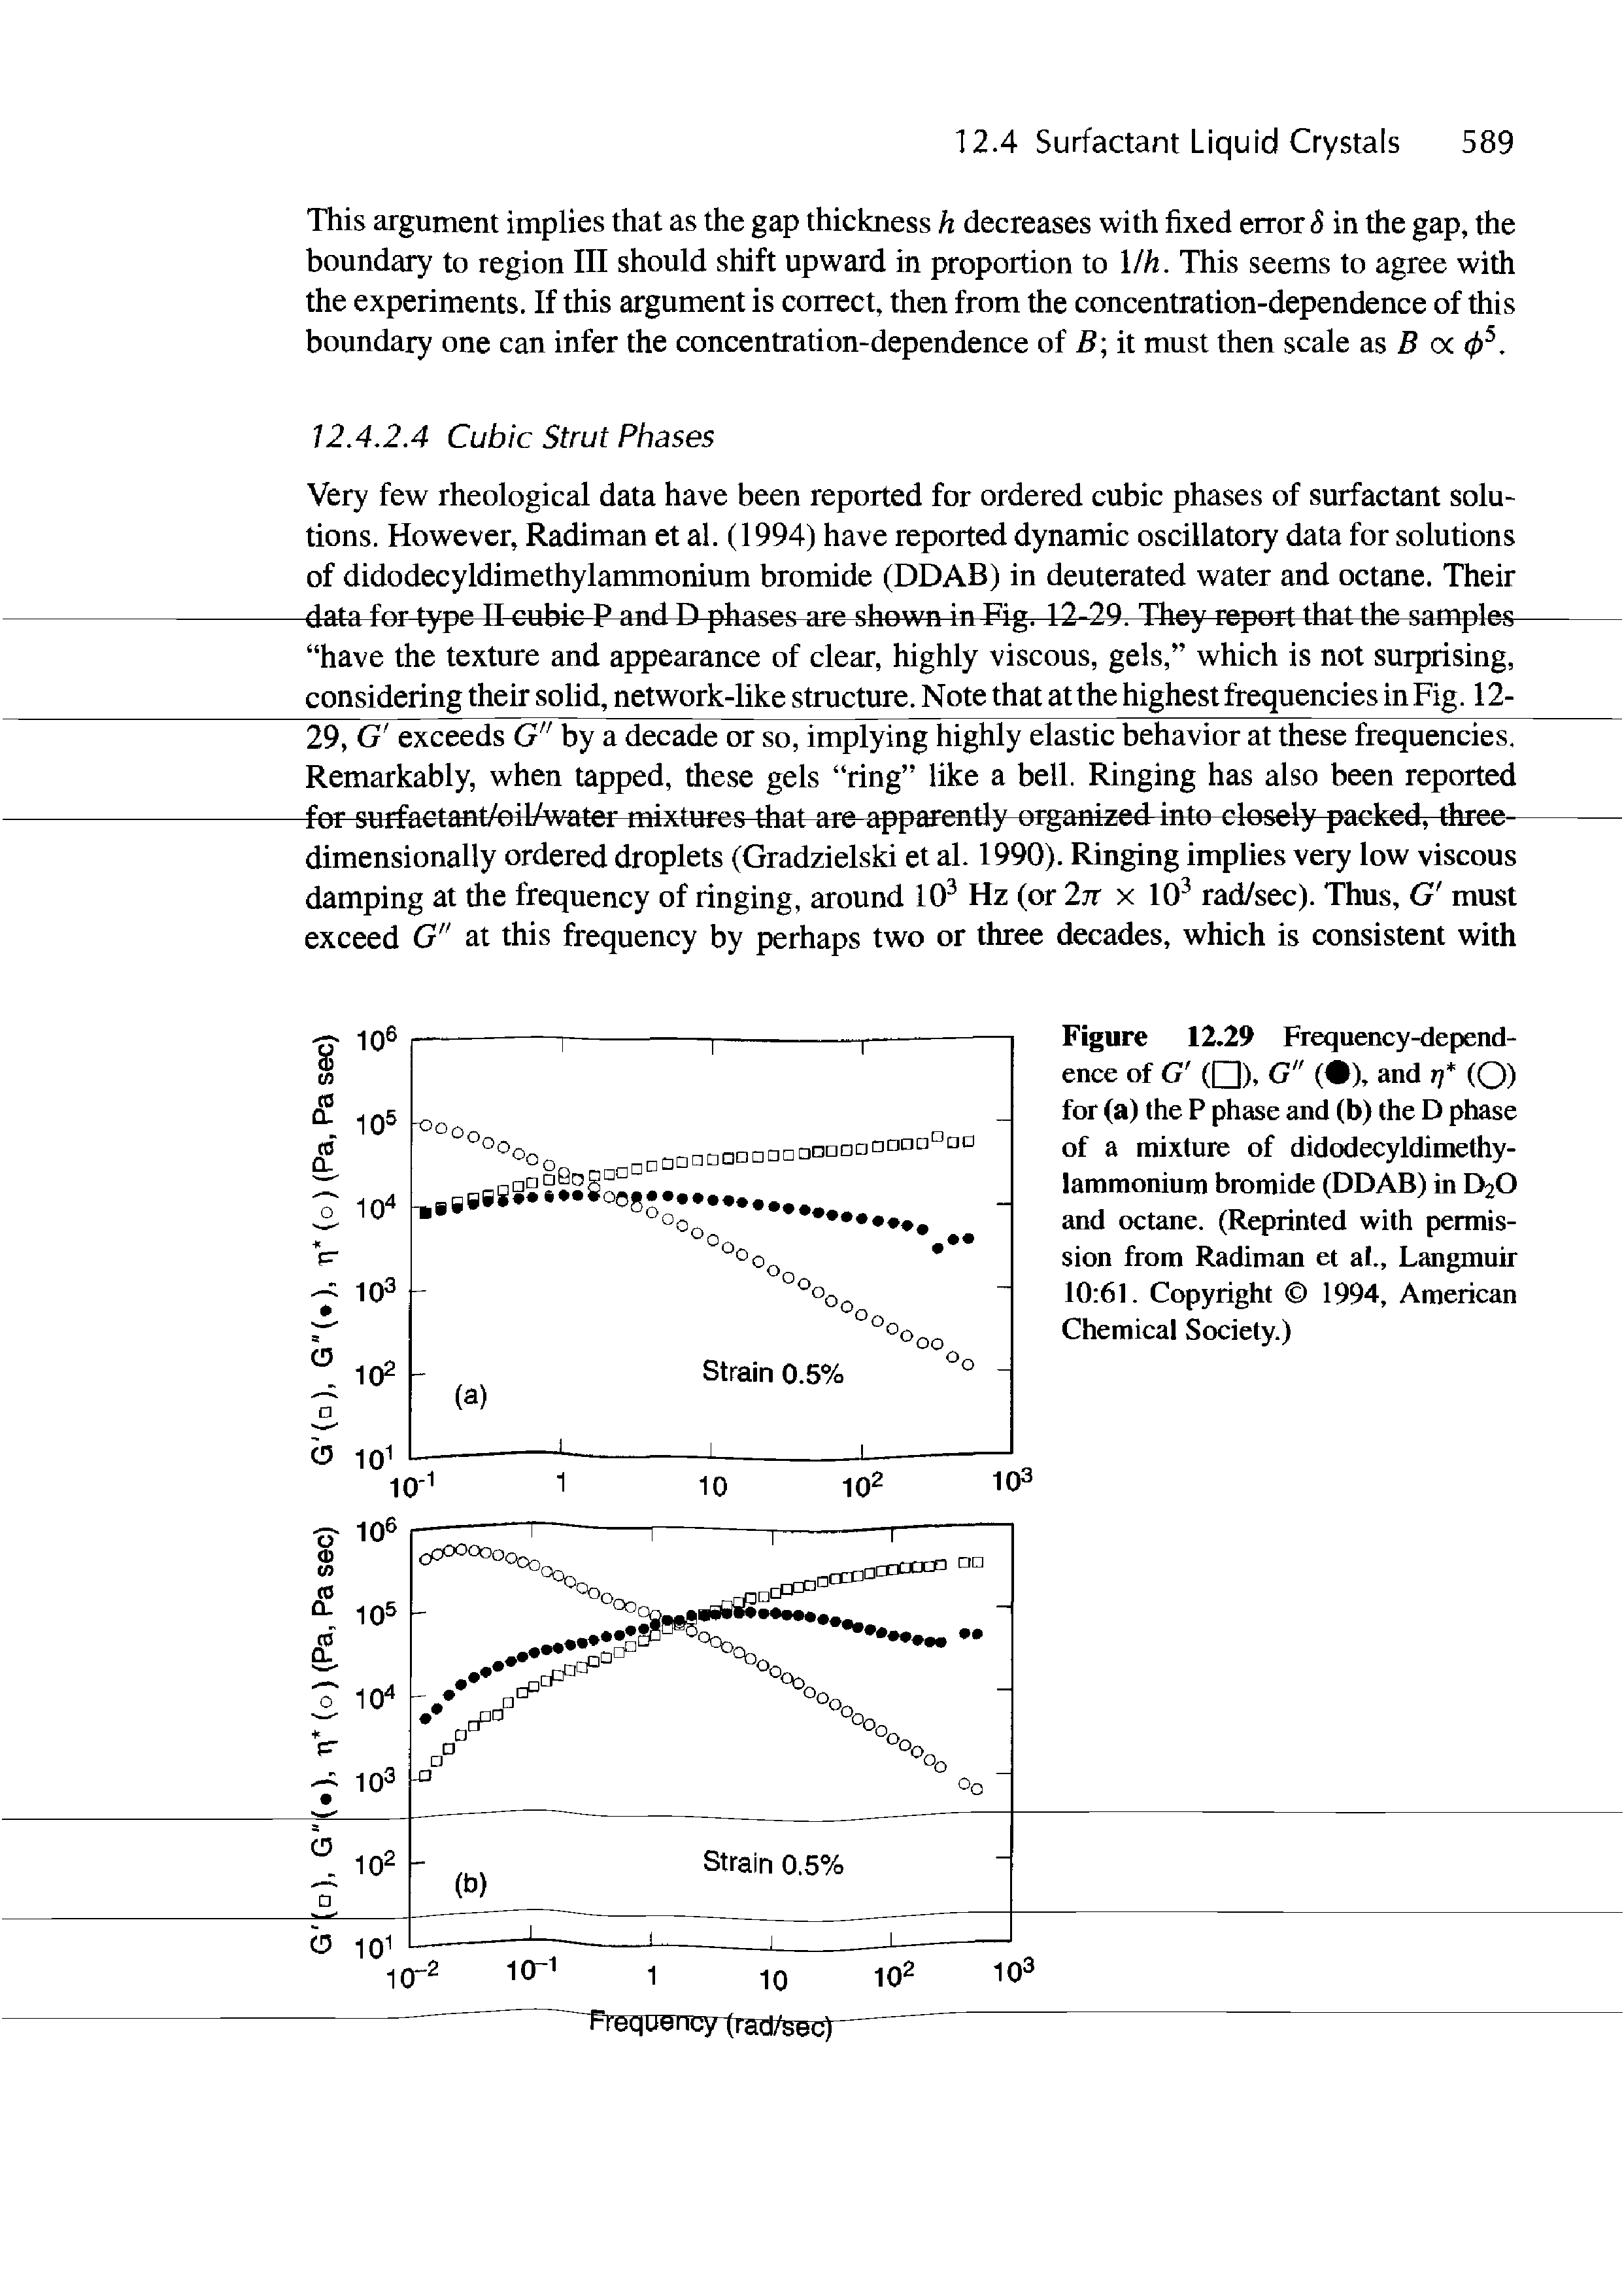 Figure 12.29 Frequency-dependence of G ( ), G ( ), and rj (Q) for (a) the P phase and (b) the D phase of a mixture of didodecyldimethylammonium bromide (DDAB) in D2O and octane. (Reprinted with permission from Radiman et al., Langmuir 10 61. Copyright 1994, American Chemical Society.)...